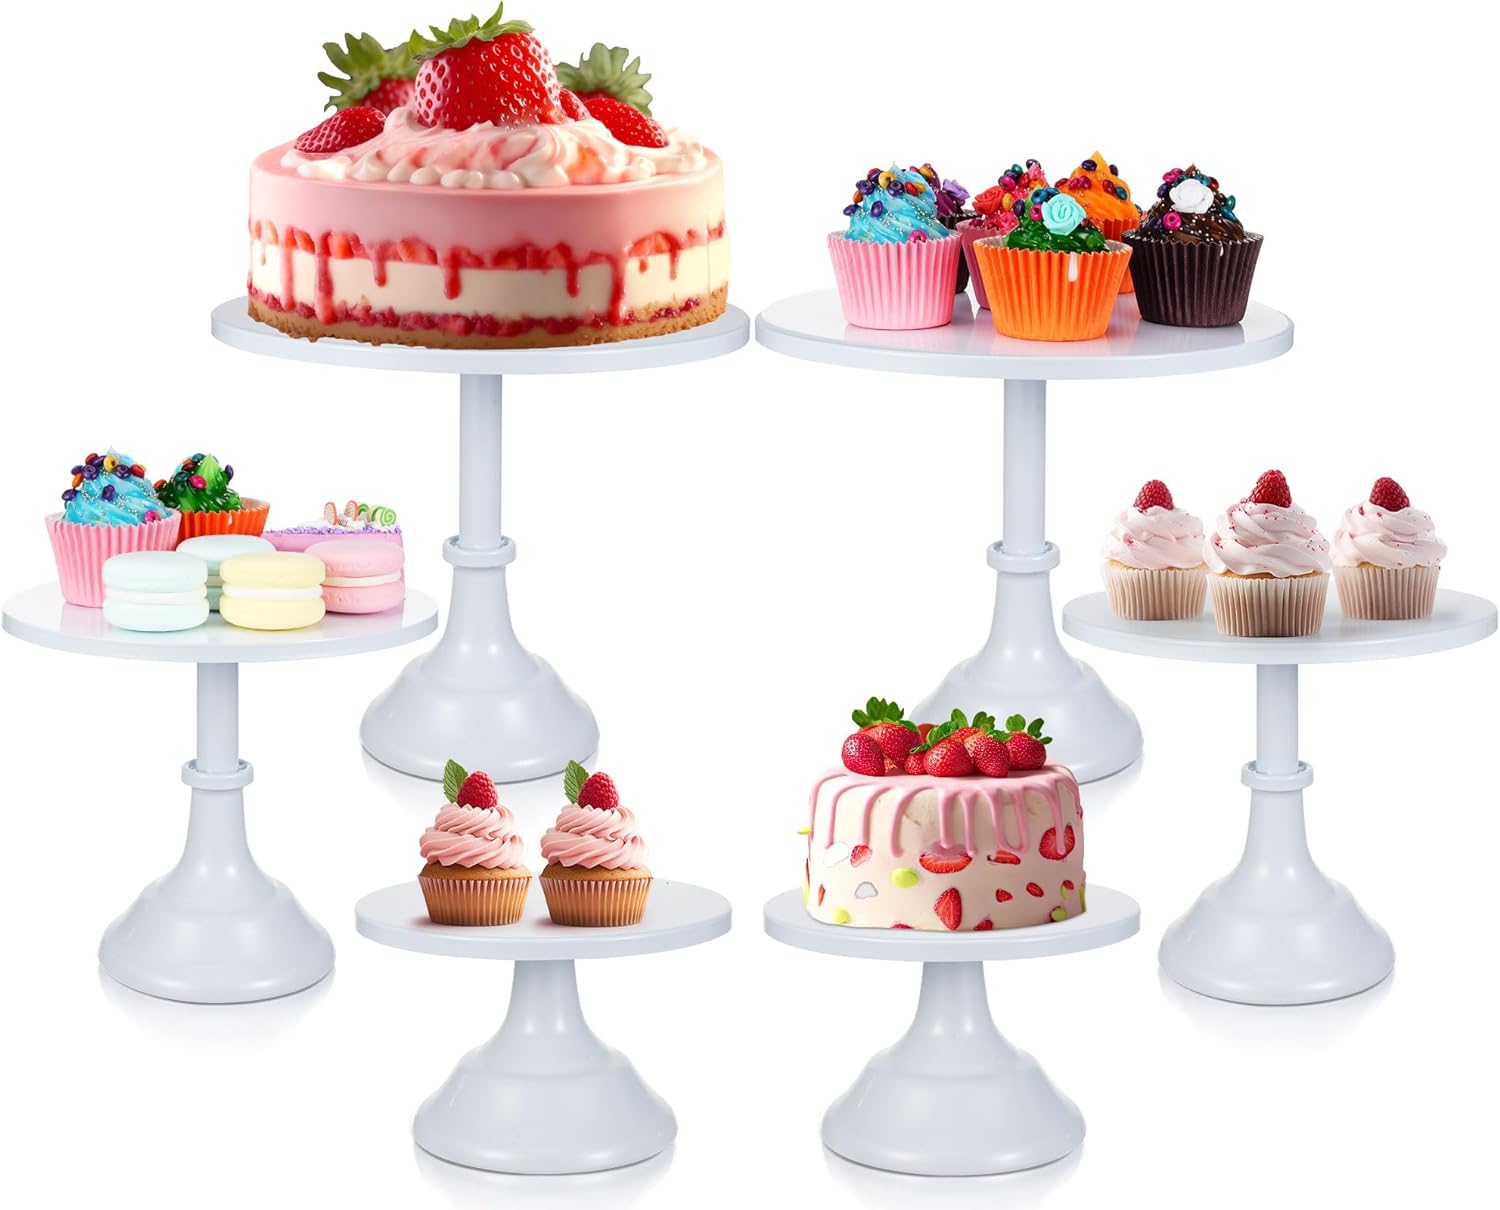 Umigy 6 Pcs White Cake Stand Set Metal Cake Stands Round Metal Cupcake Holder for Party Dessert Table Display Set for Tea Party, Christmas, Wedding, Birthday, Graduation, Anniversary, Baby Shower